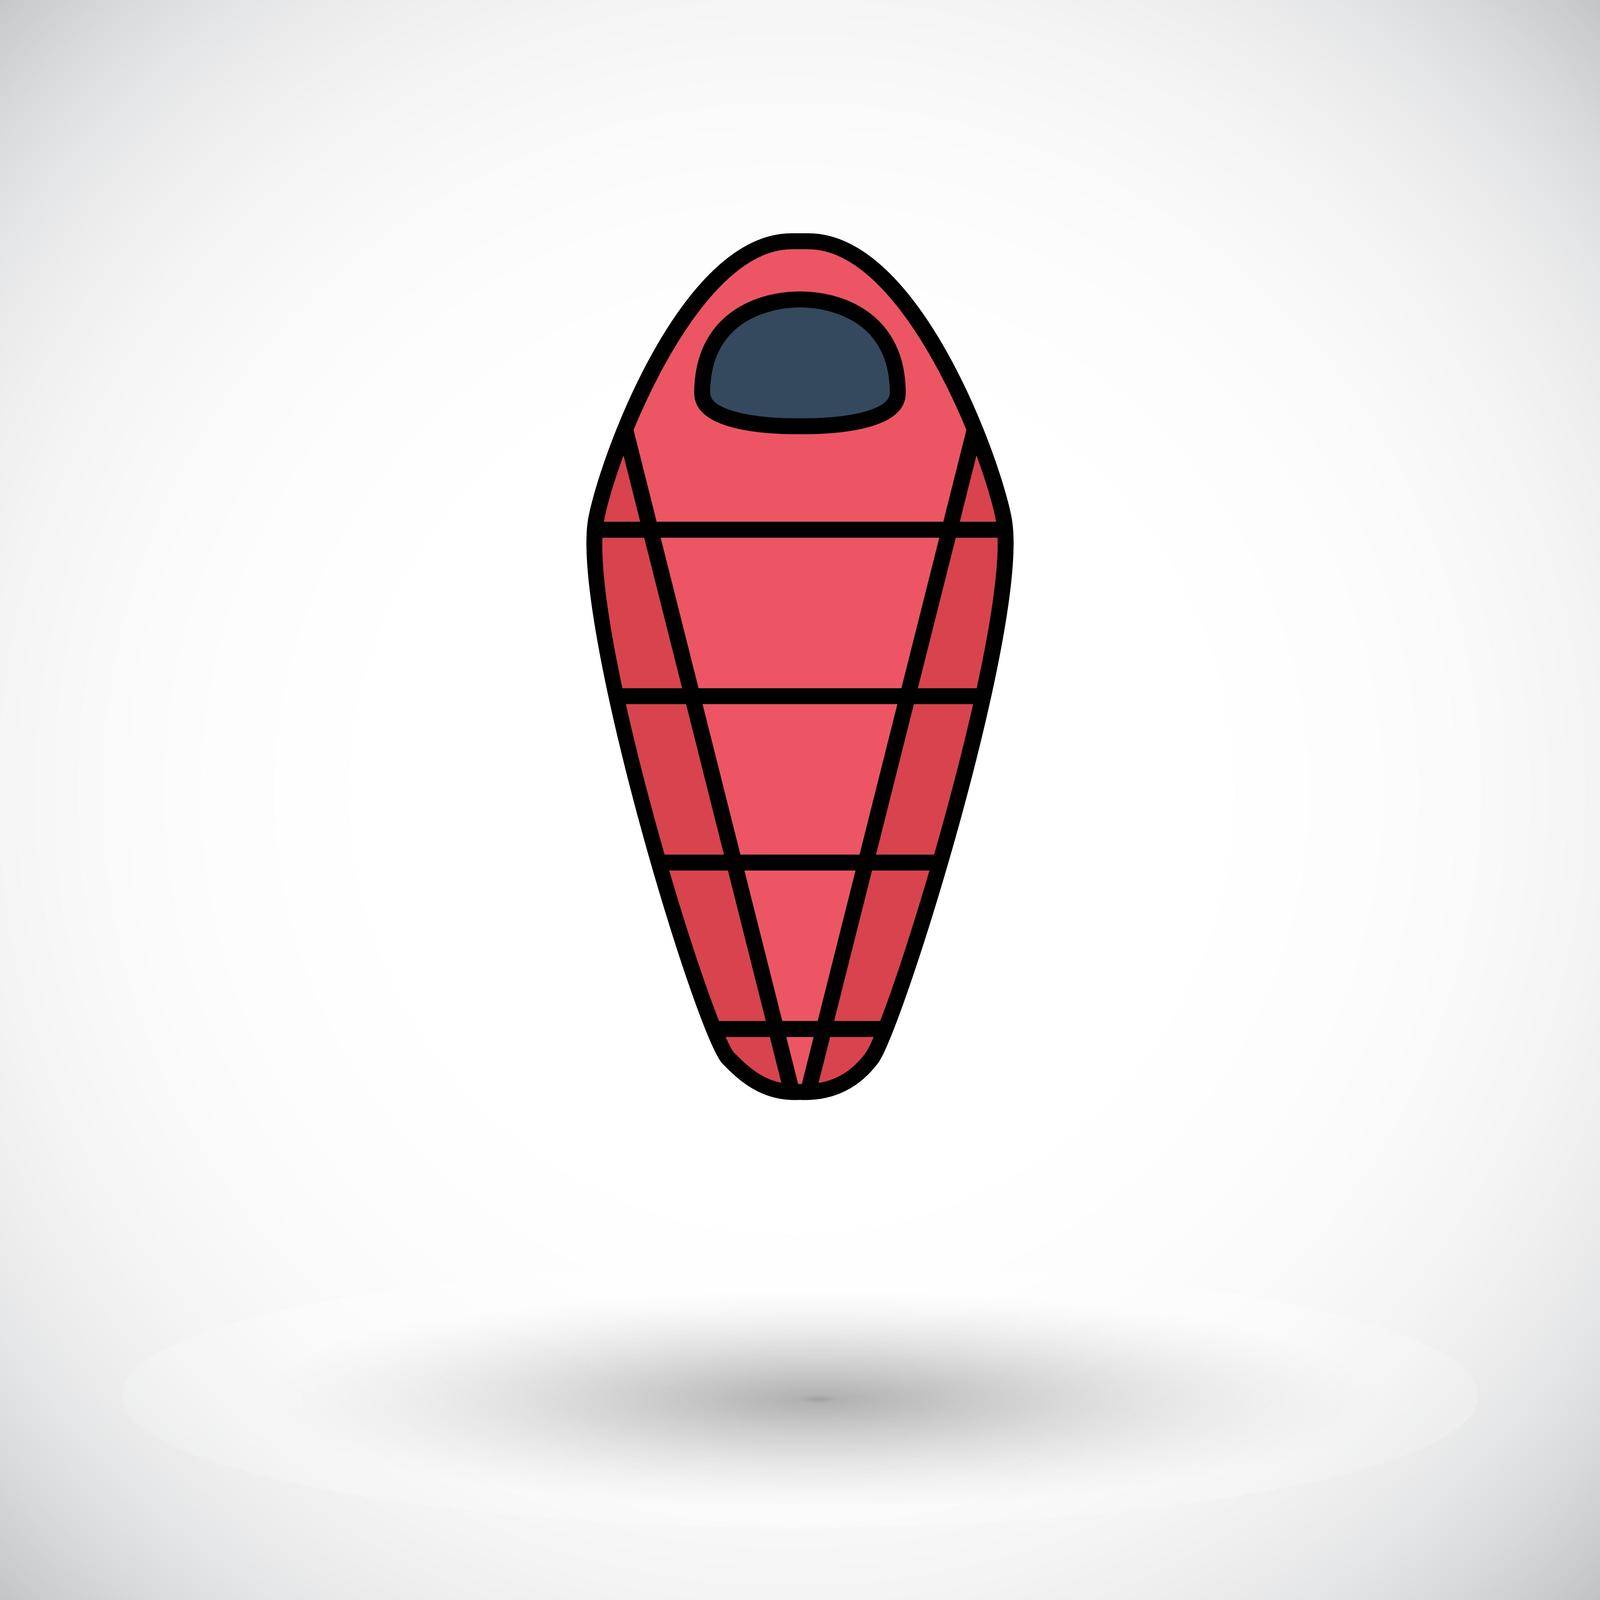 Sleeping bag. Flat icon on the white background for web and mobile applications. Vector illustration.